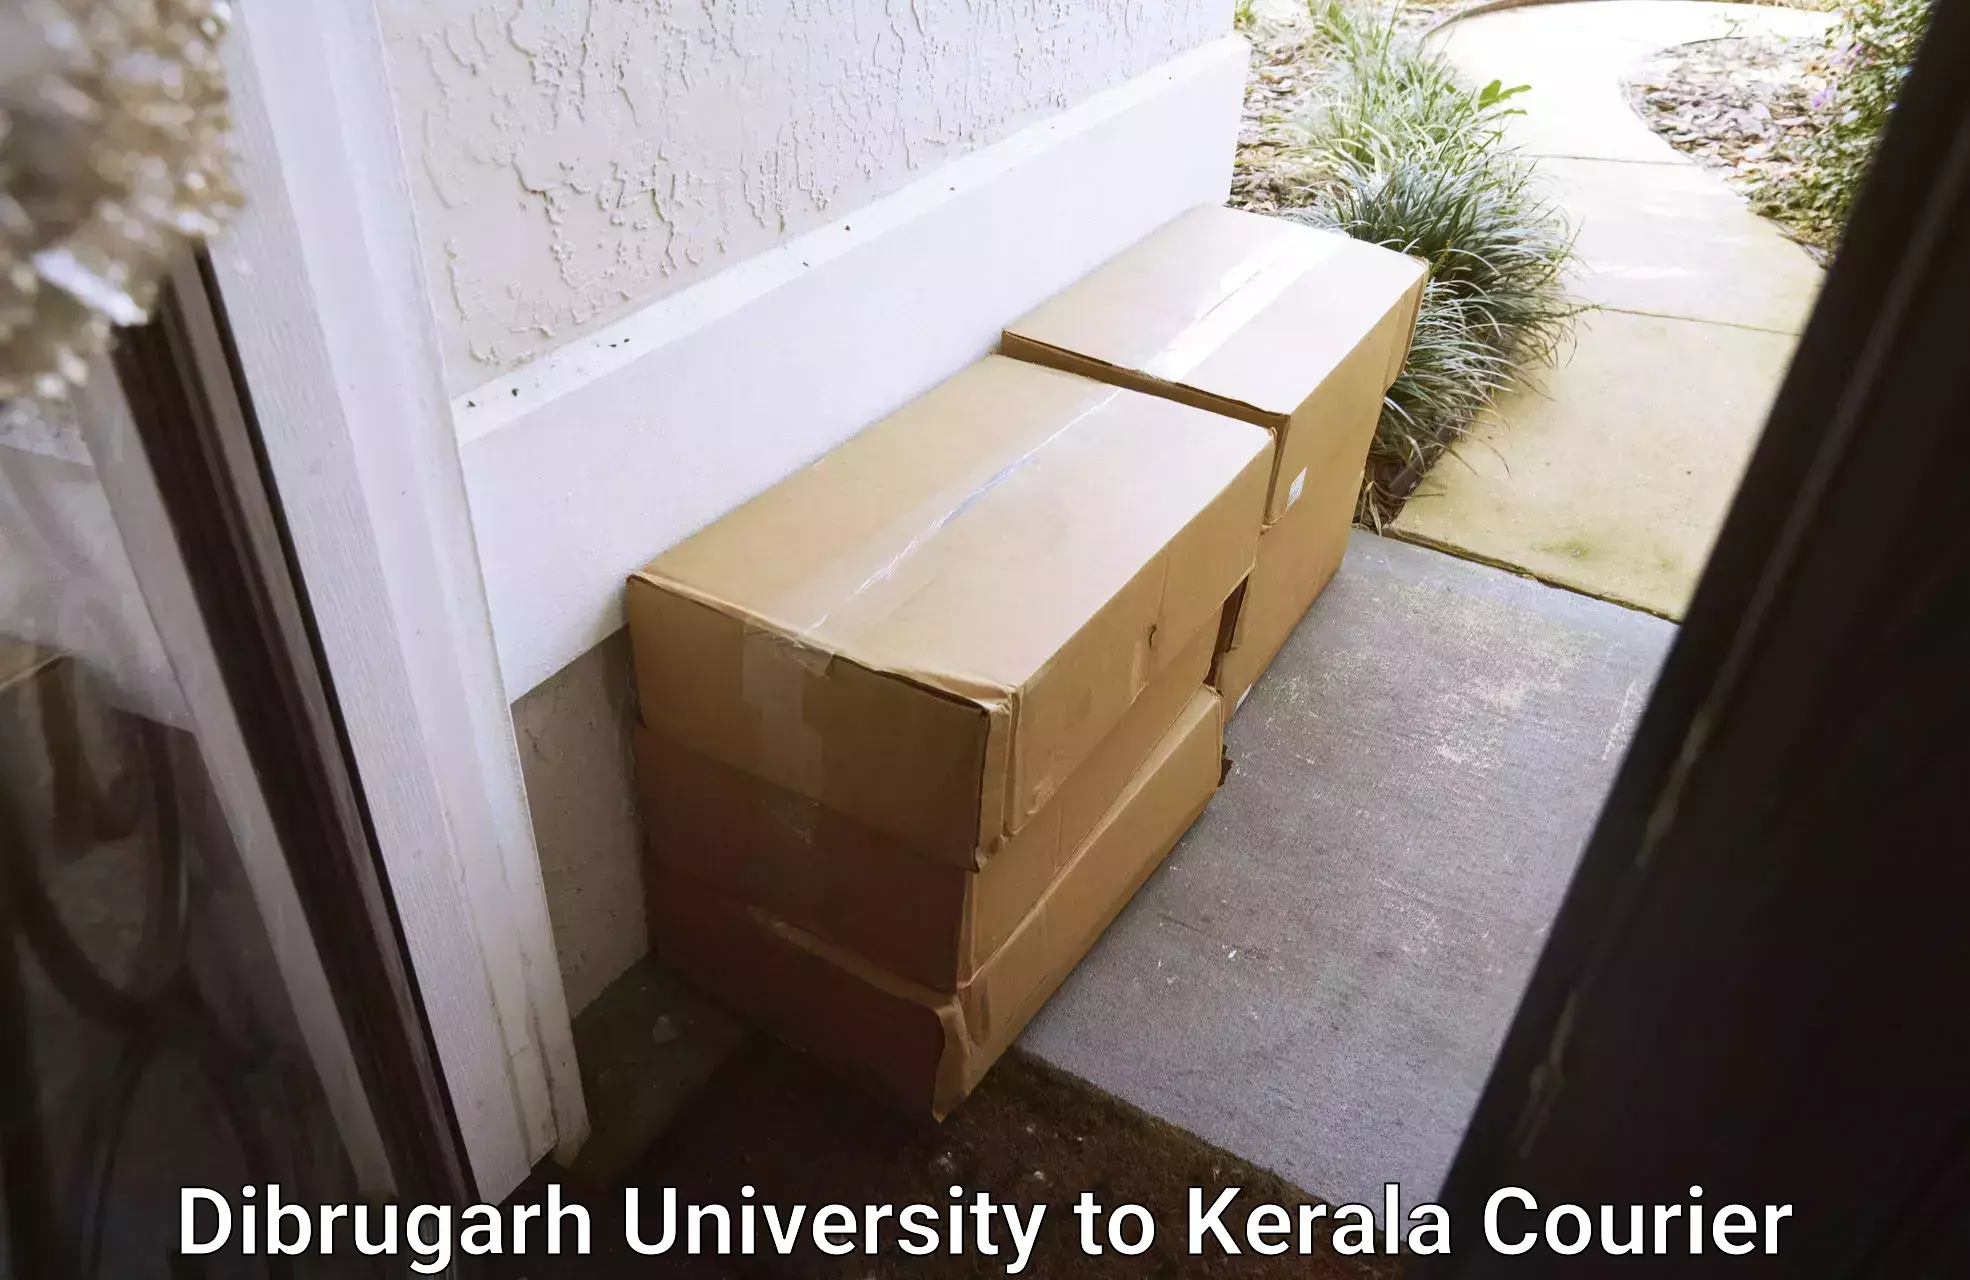 Large-scale shipping solutions Dibrugarh University to Pazhayannur